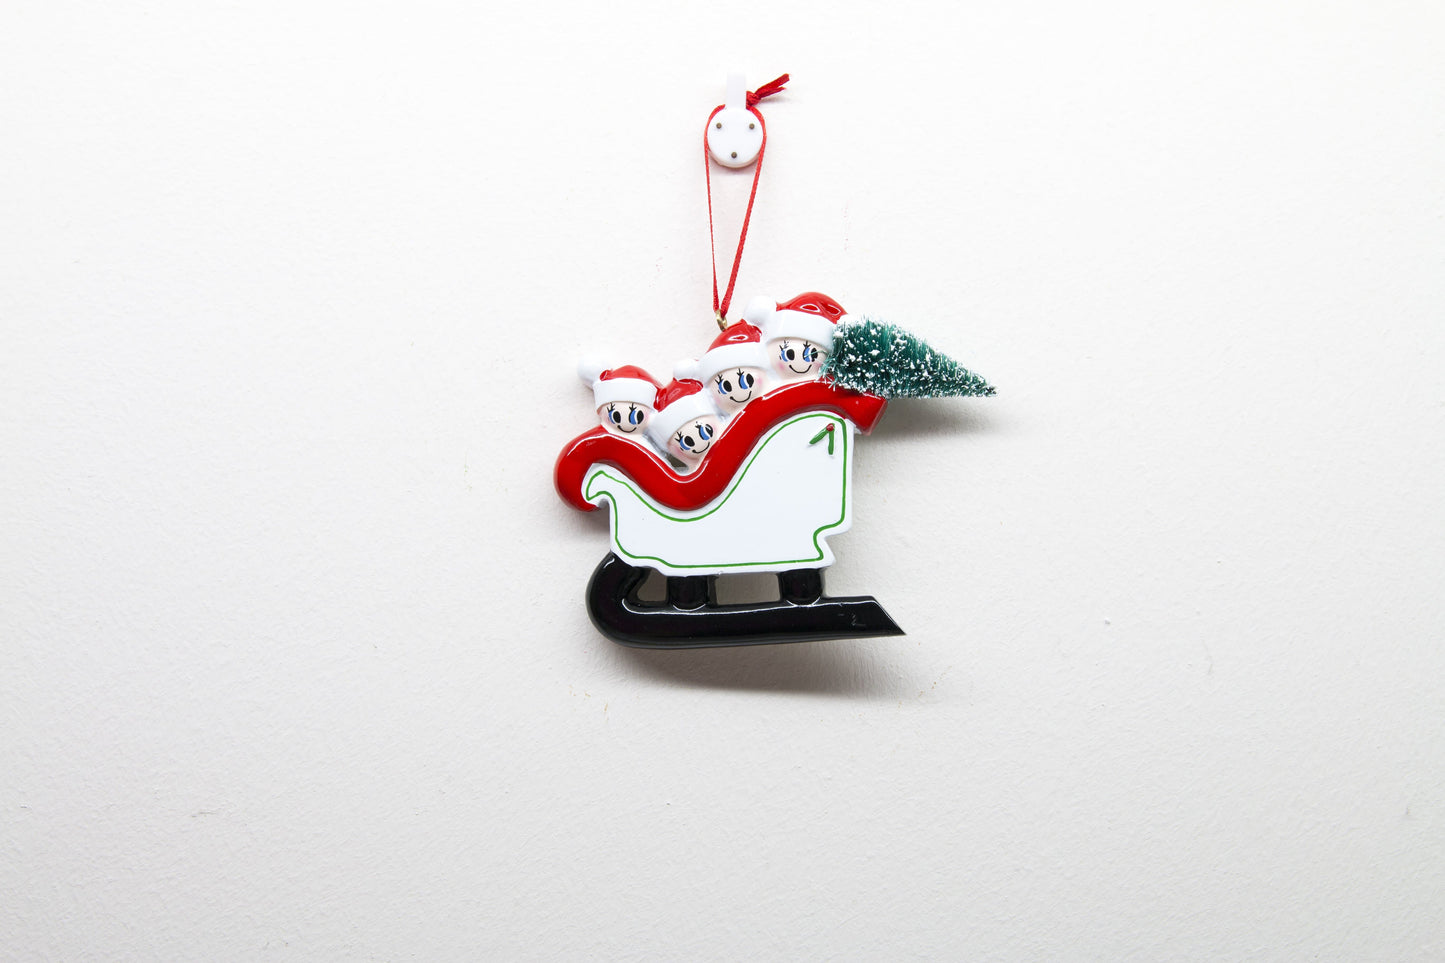 Sleigh - Christmas Ornament (Suitable for Personalization)